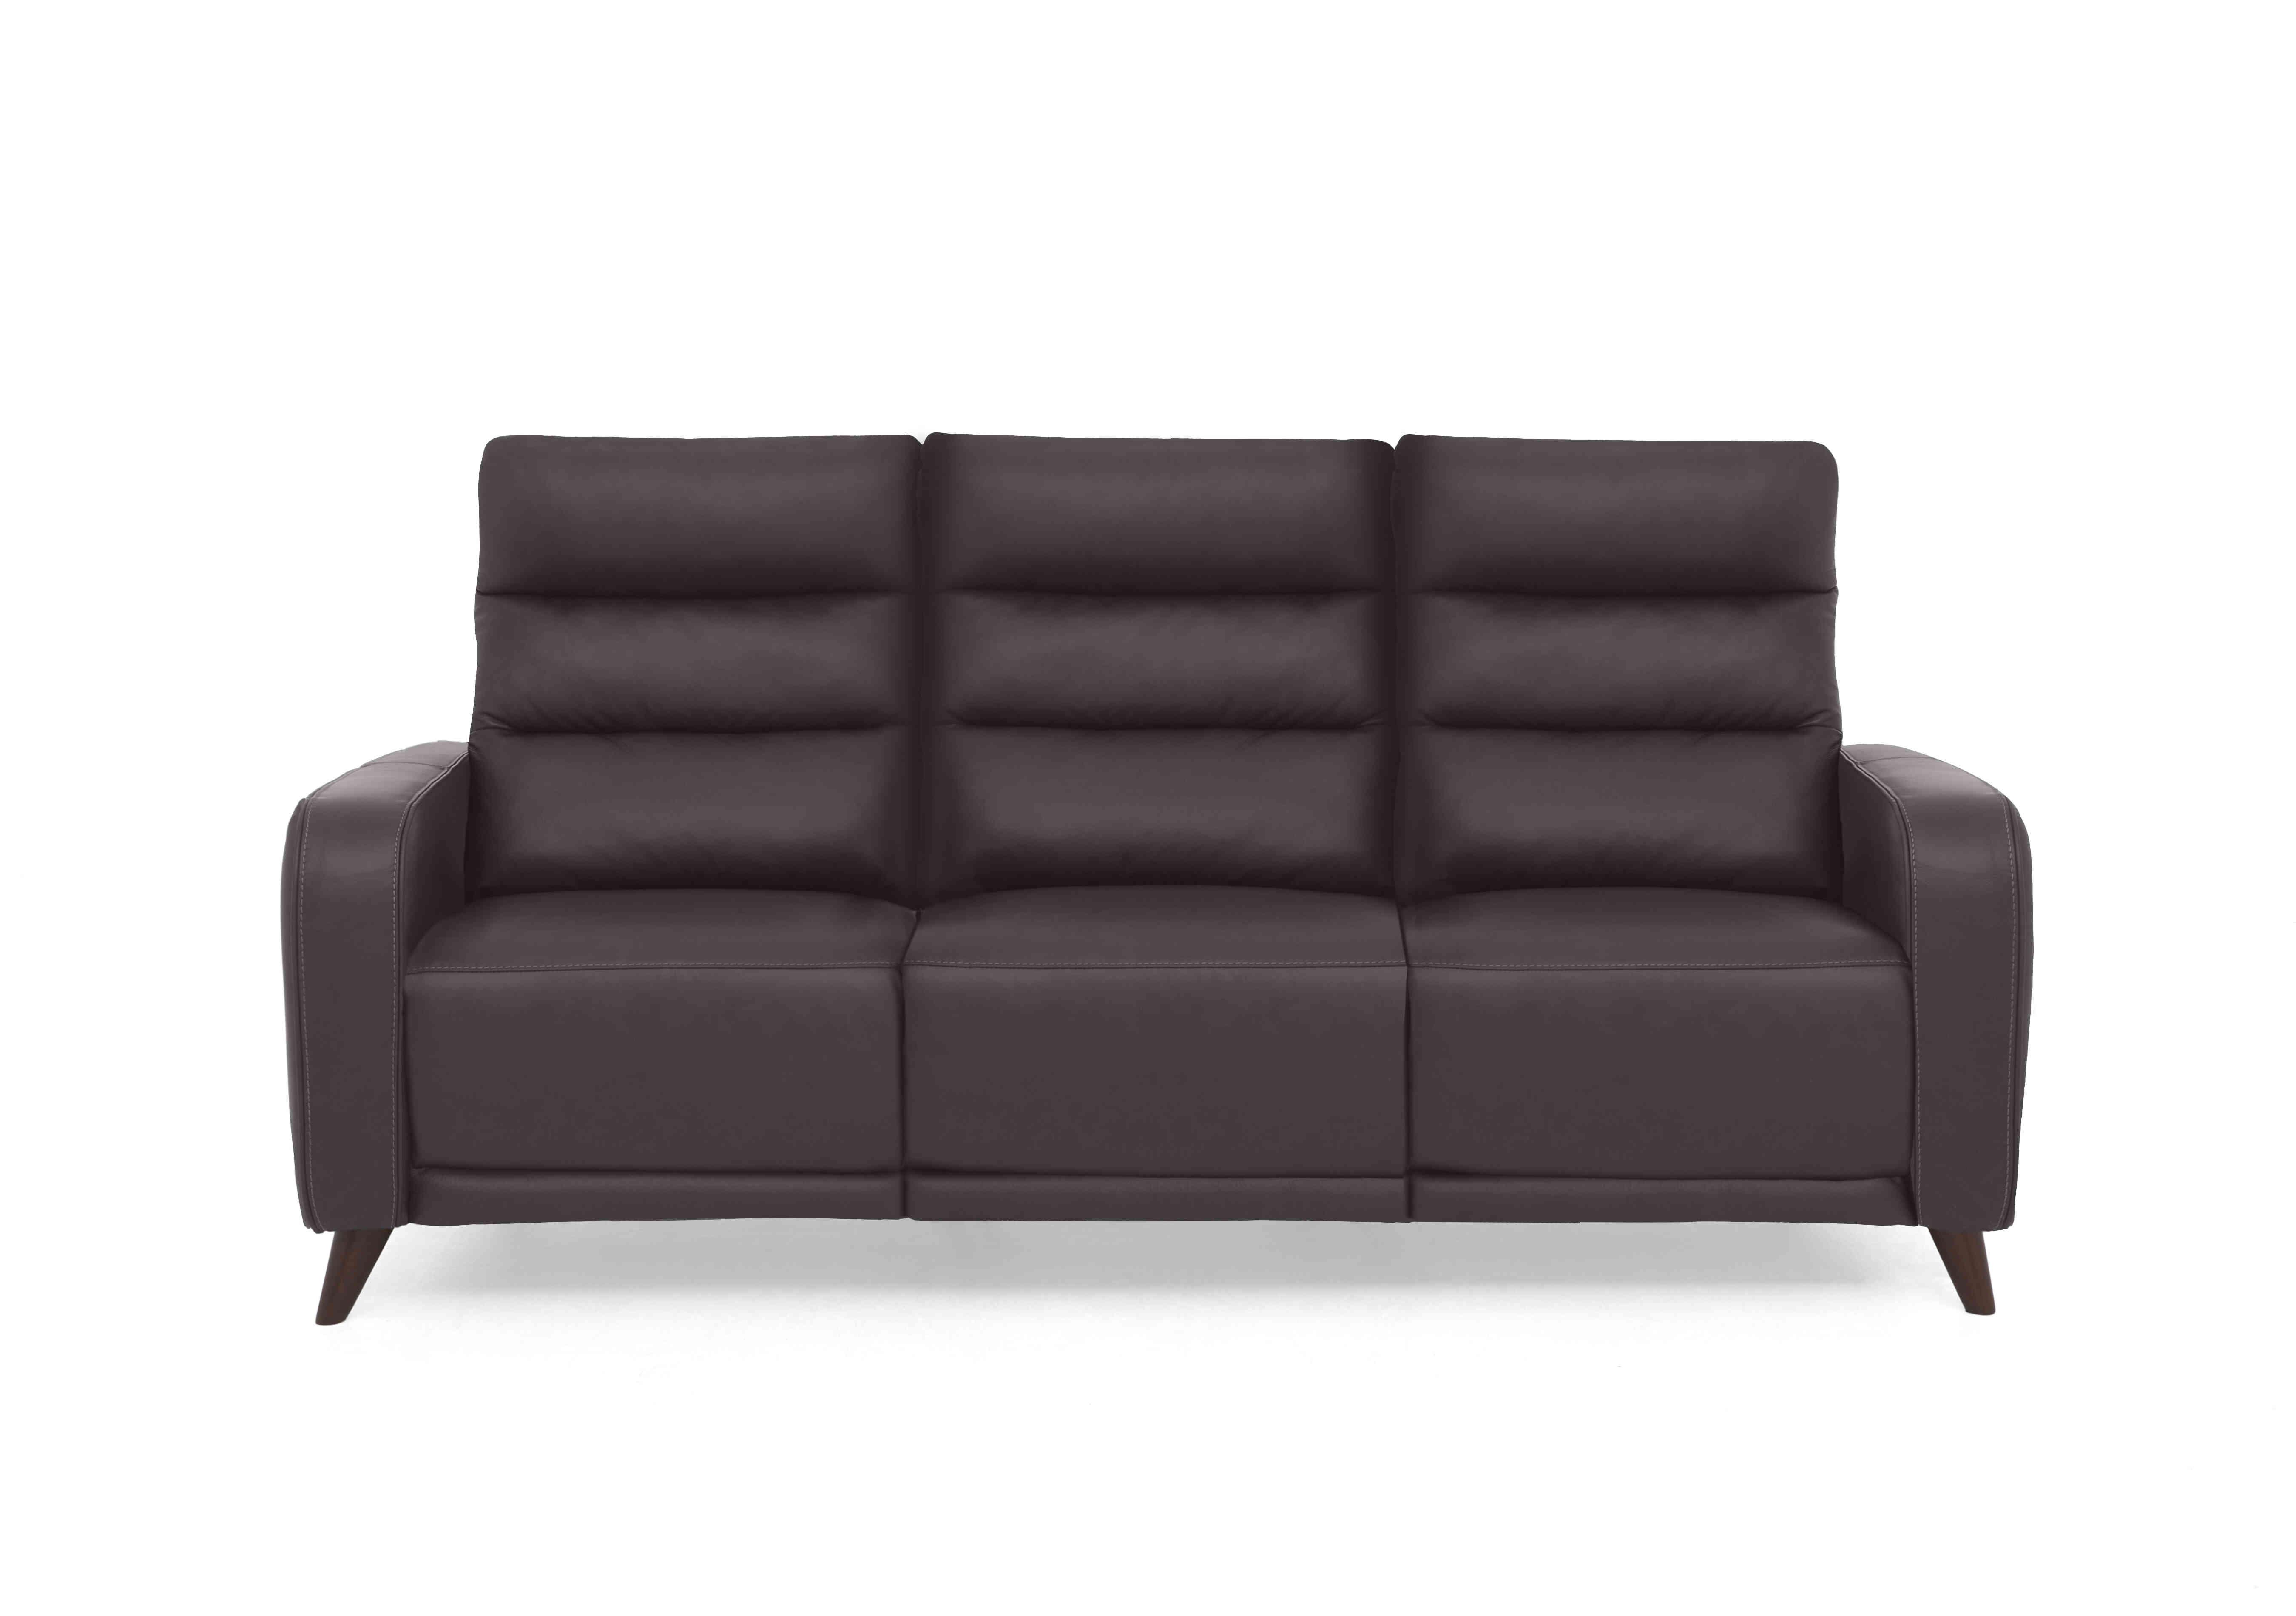 Quinn 3 Seater Leather Sofa in Lx-6404 Piompo on Furniture Village